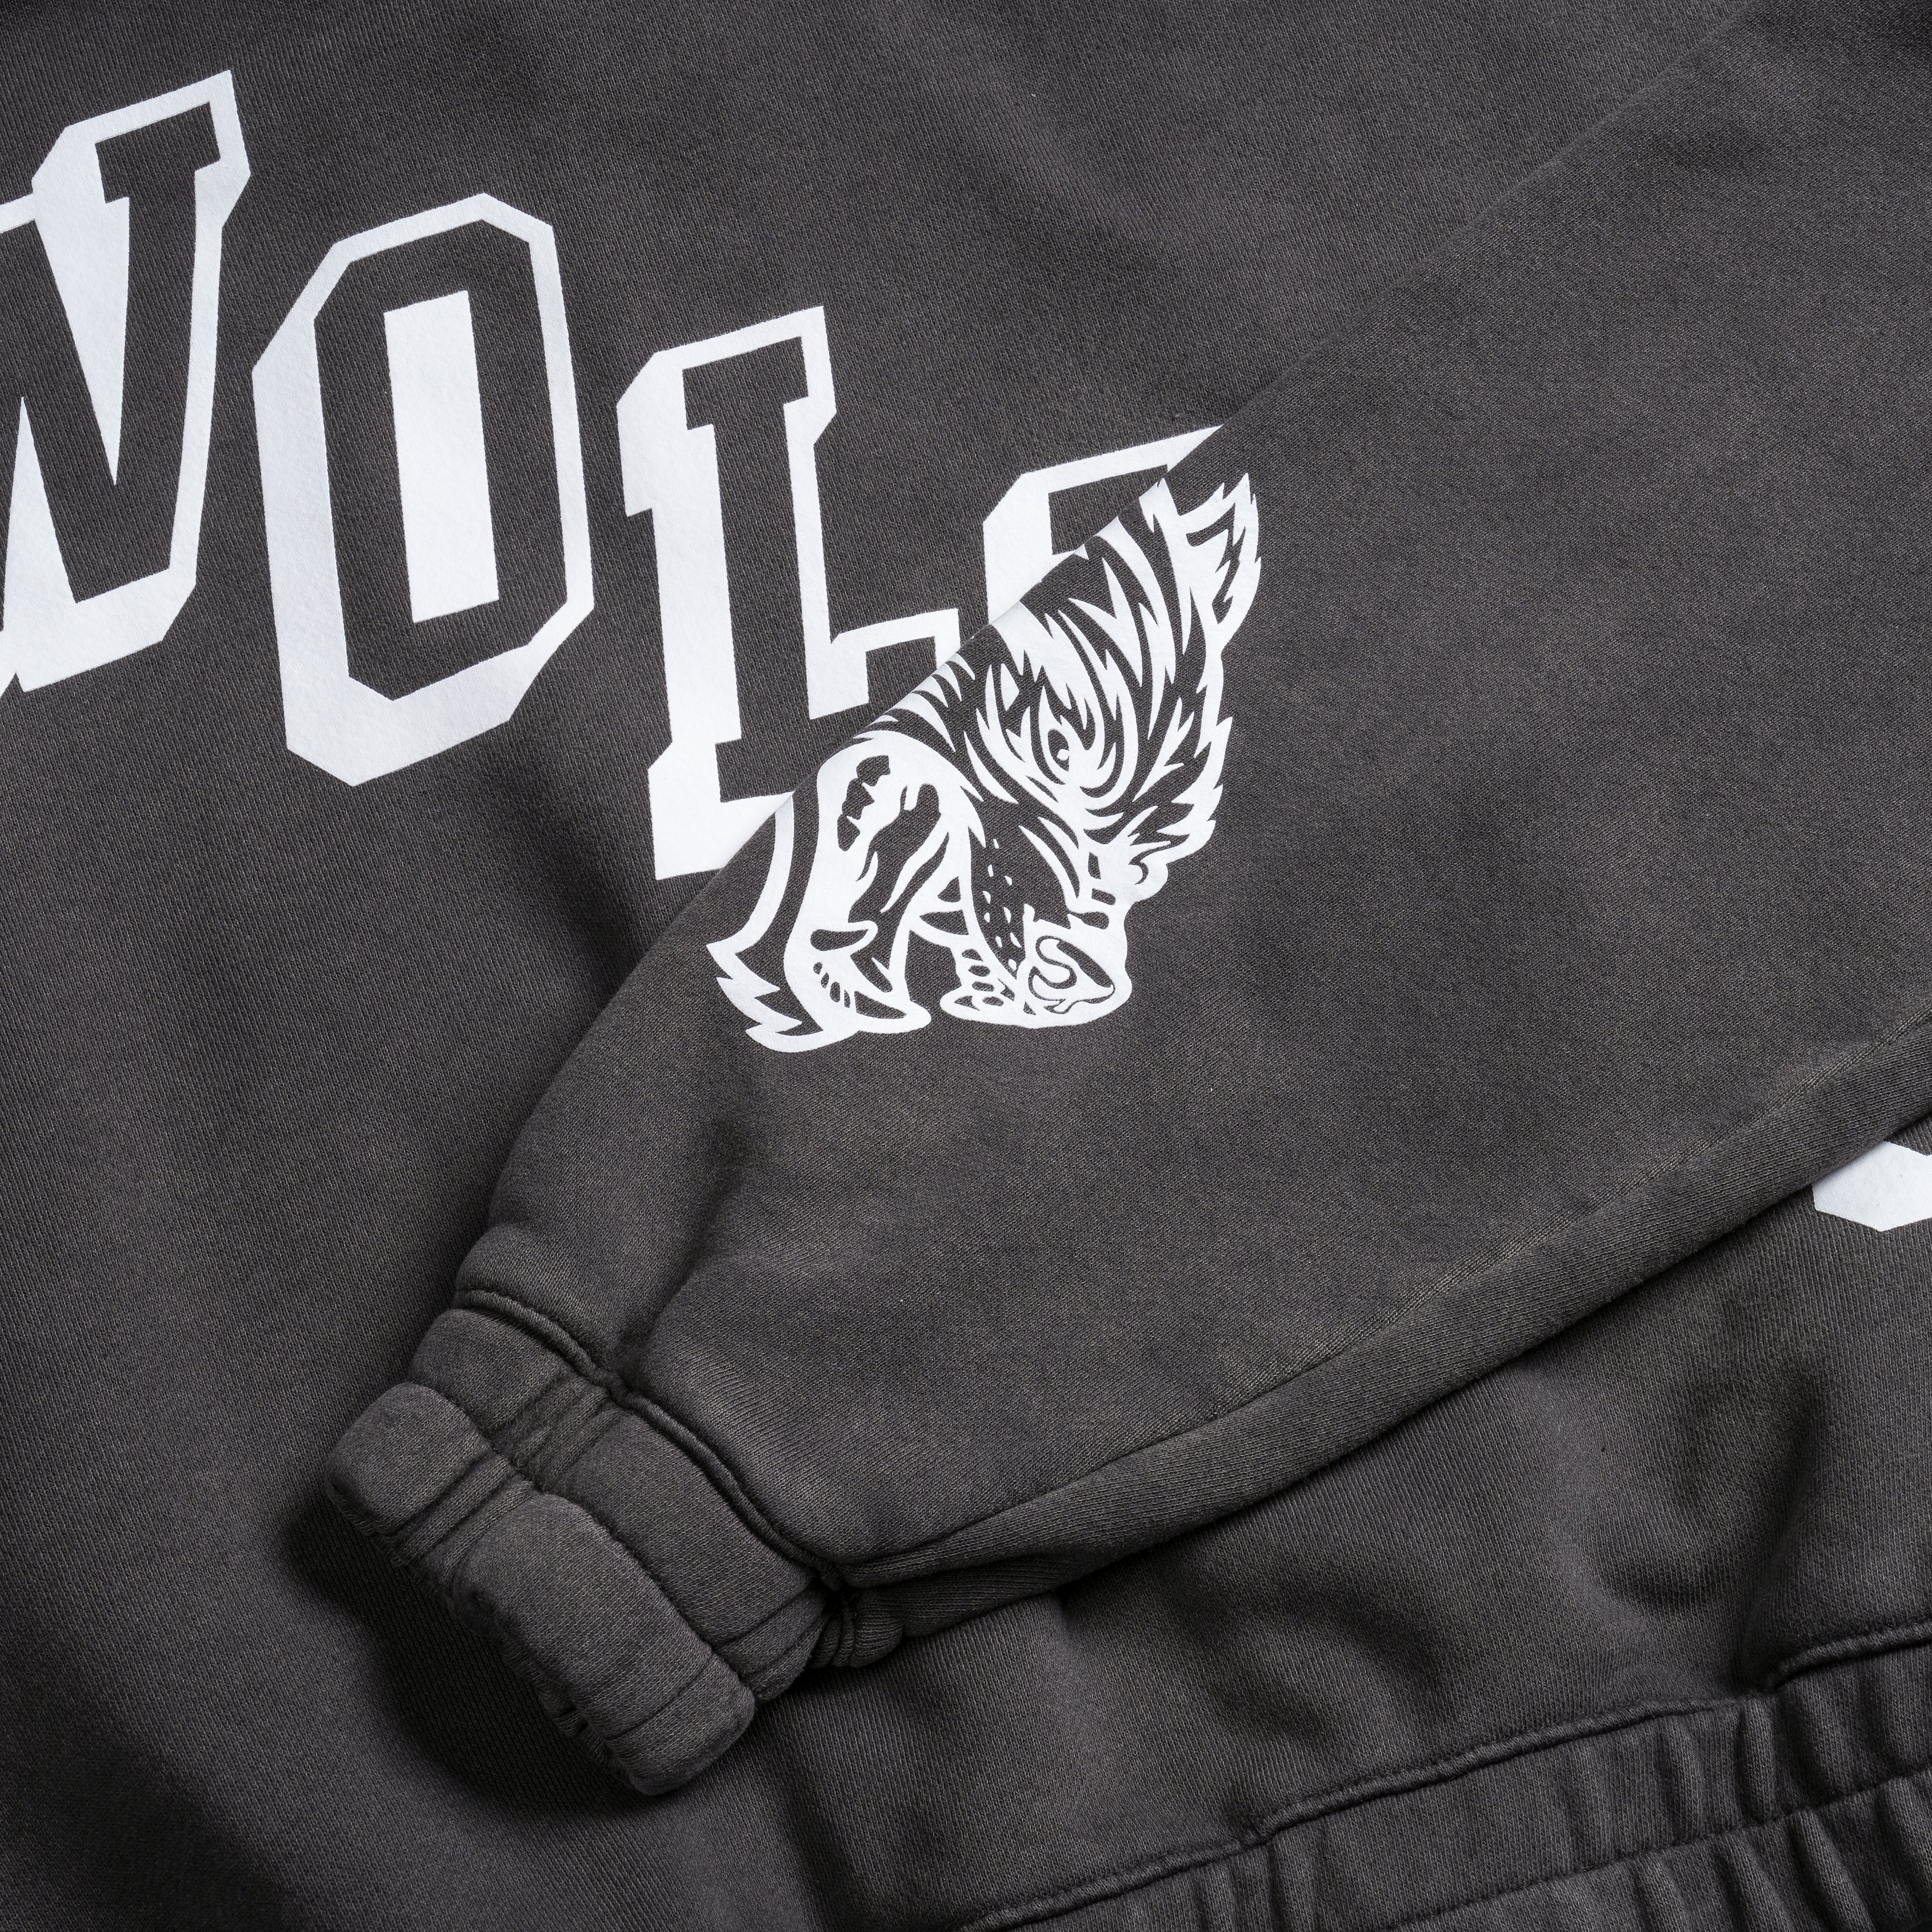 Stairs "Chambers" (Cropped) Zip Hoodie in Wolf Gray